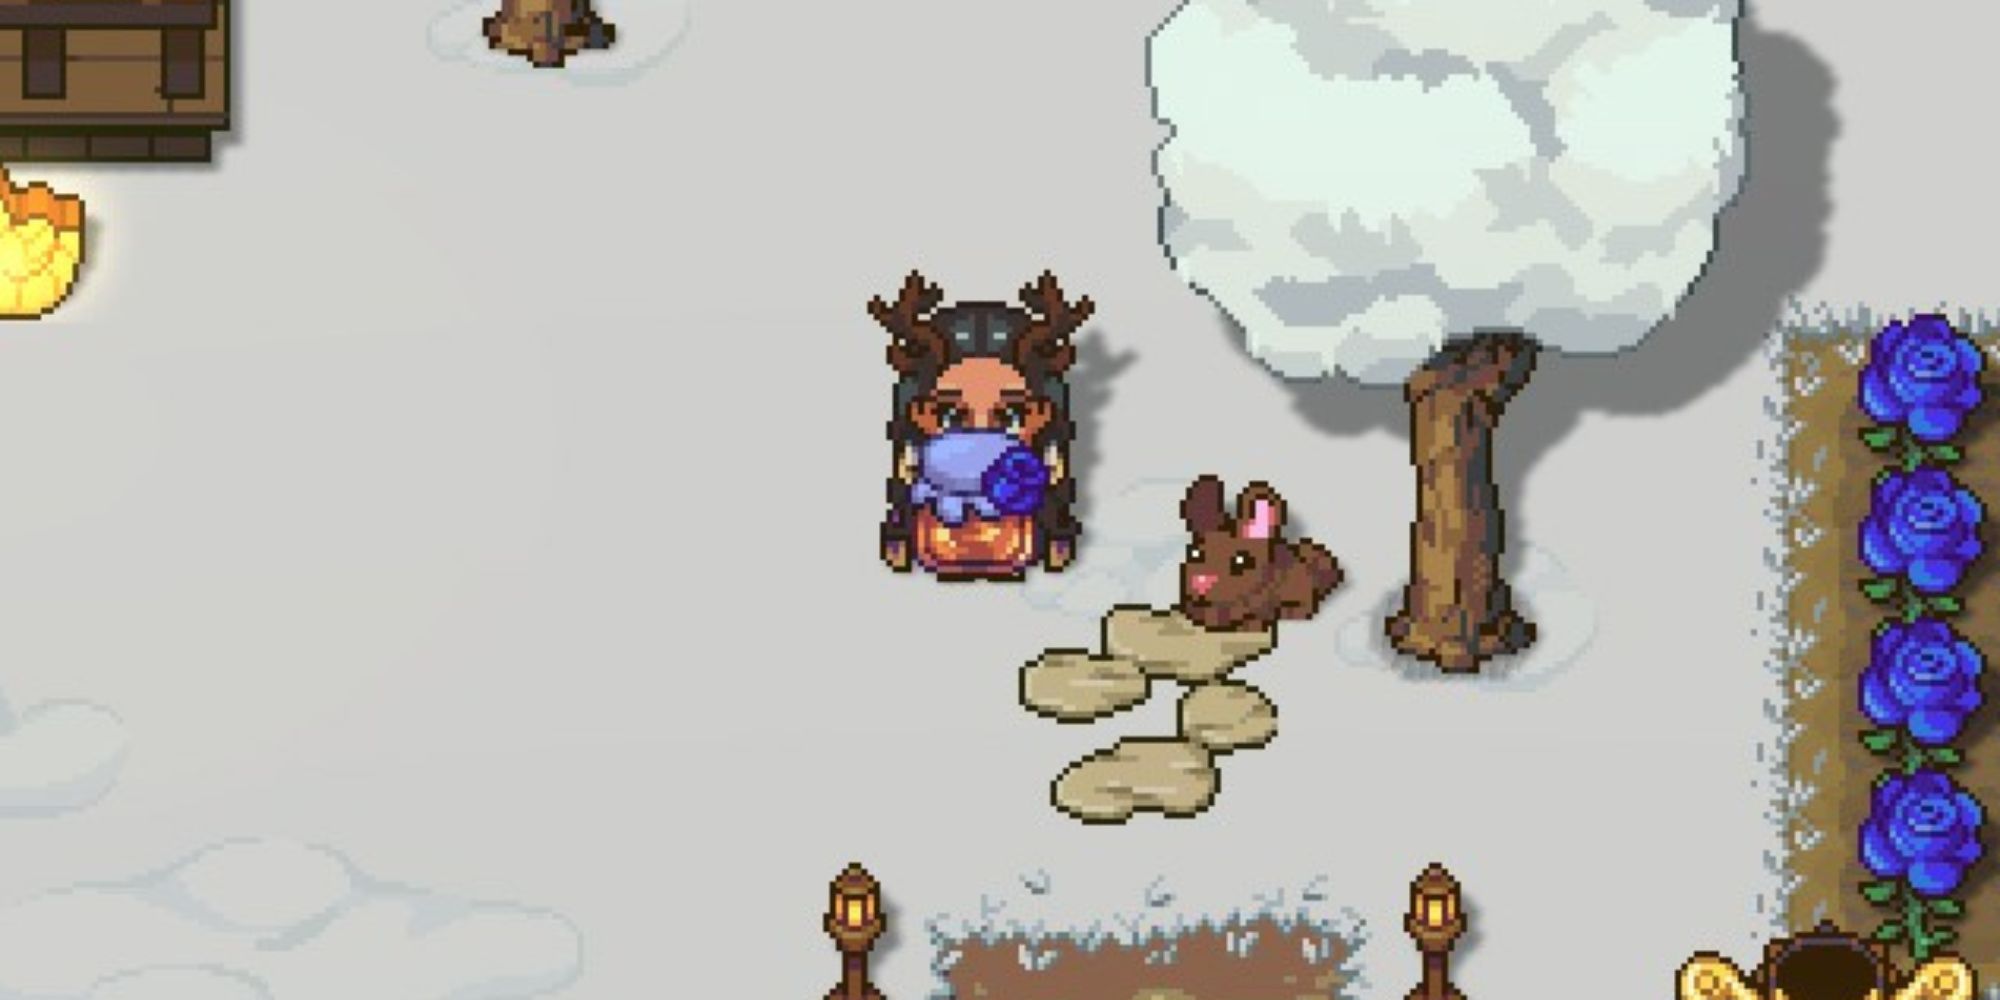 sun haven player holding blue honey with brown pet bunny next to them